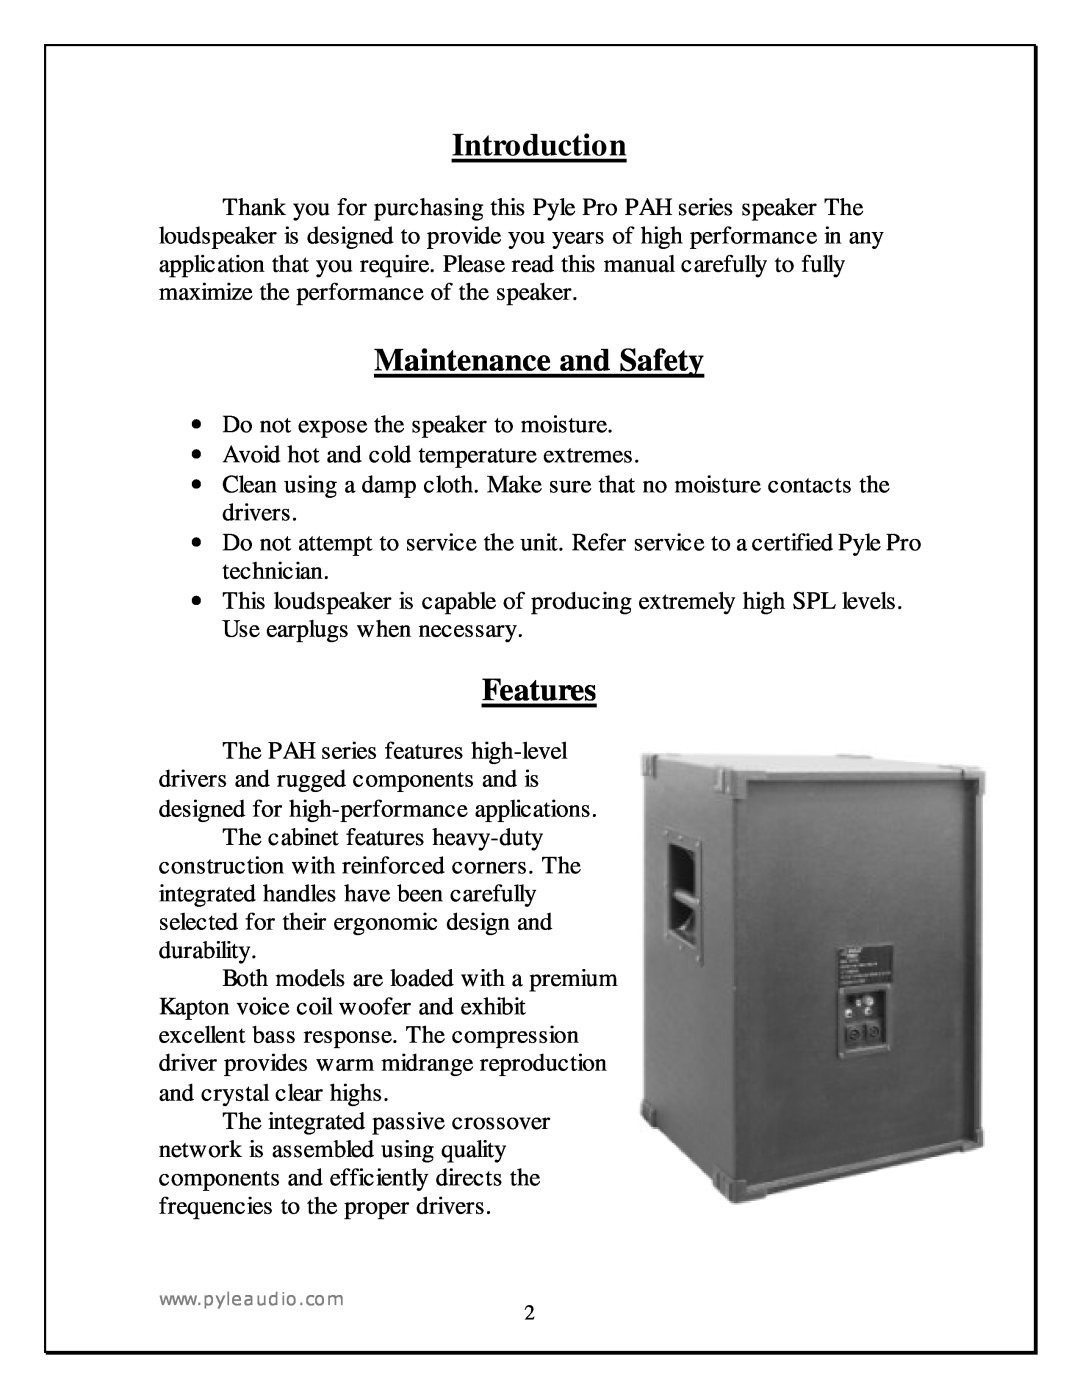 PYLE Audio PAH1580, PAH1280 manual Introduction, Maintenance and Safety, Features 